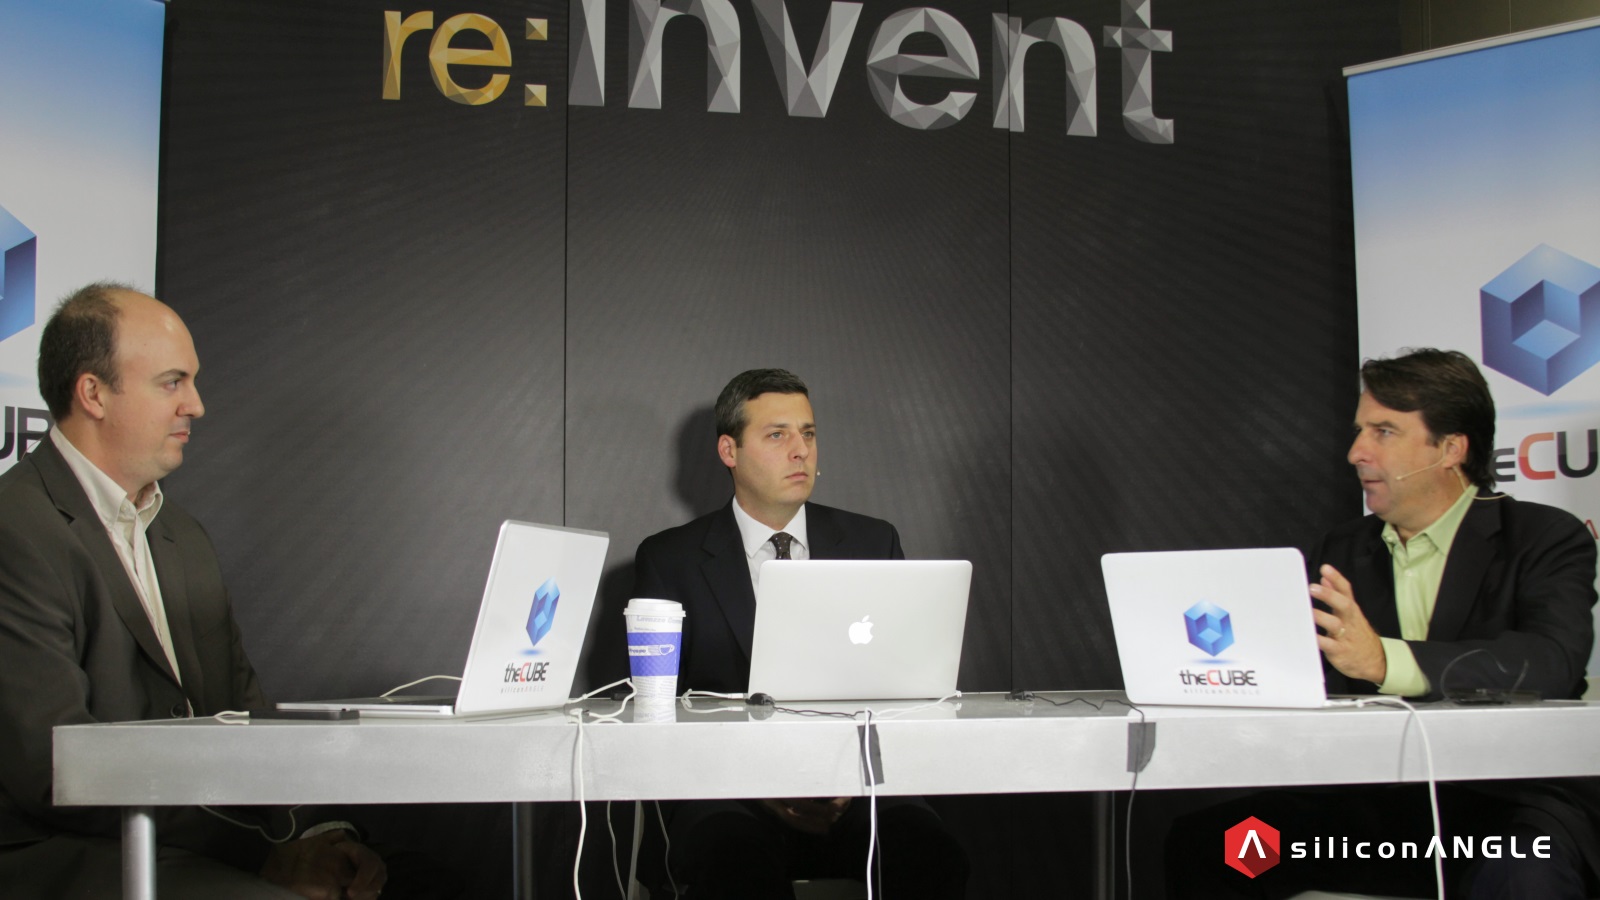 theCUBE Live at AWS reInvent